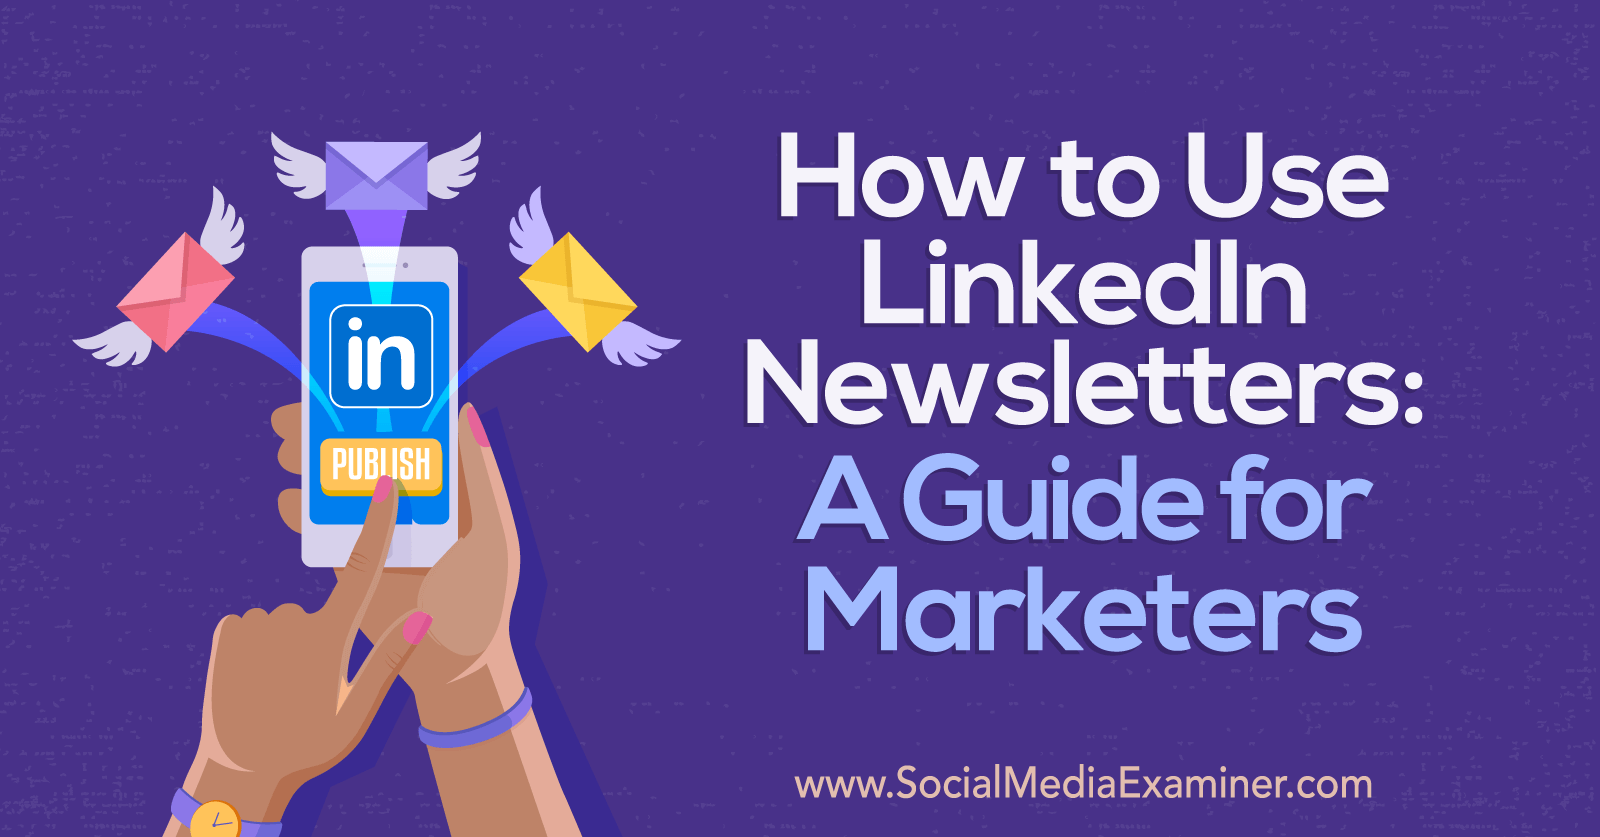 How to Use LinkedIn Newsletters: A Guide for Marketers